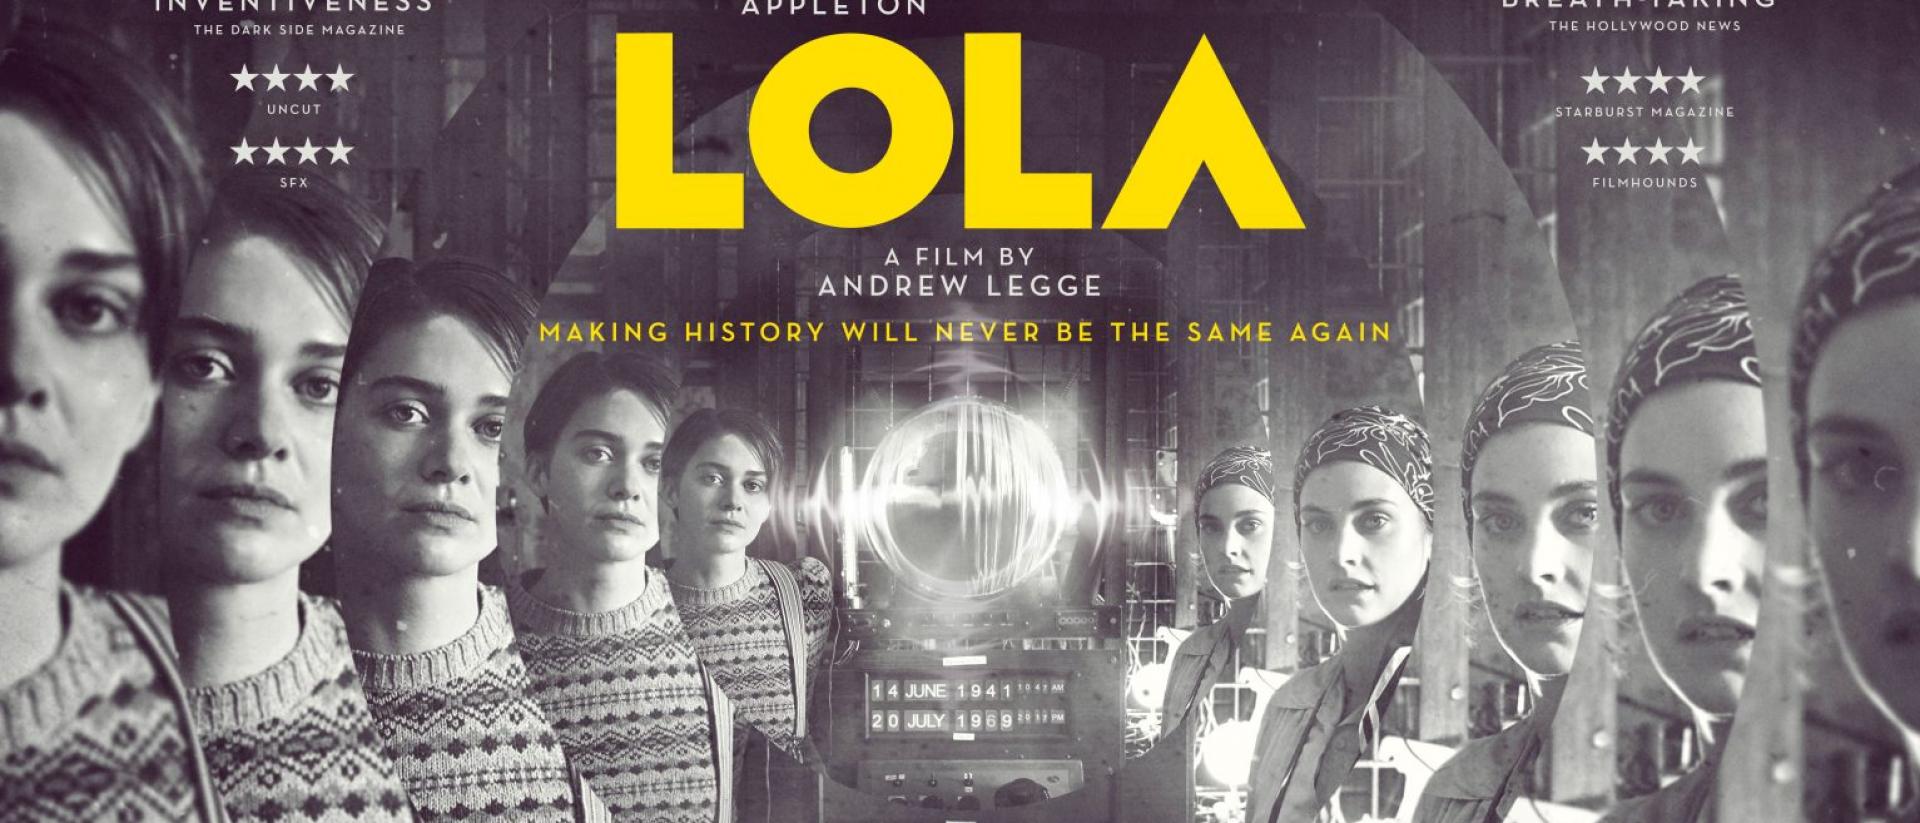 black and white still from lola featuring two people in 1940s costume standing in front of an old machine with a screen showing the moon landing